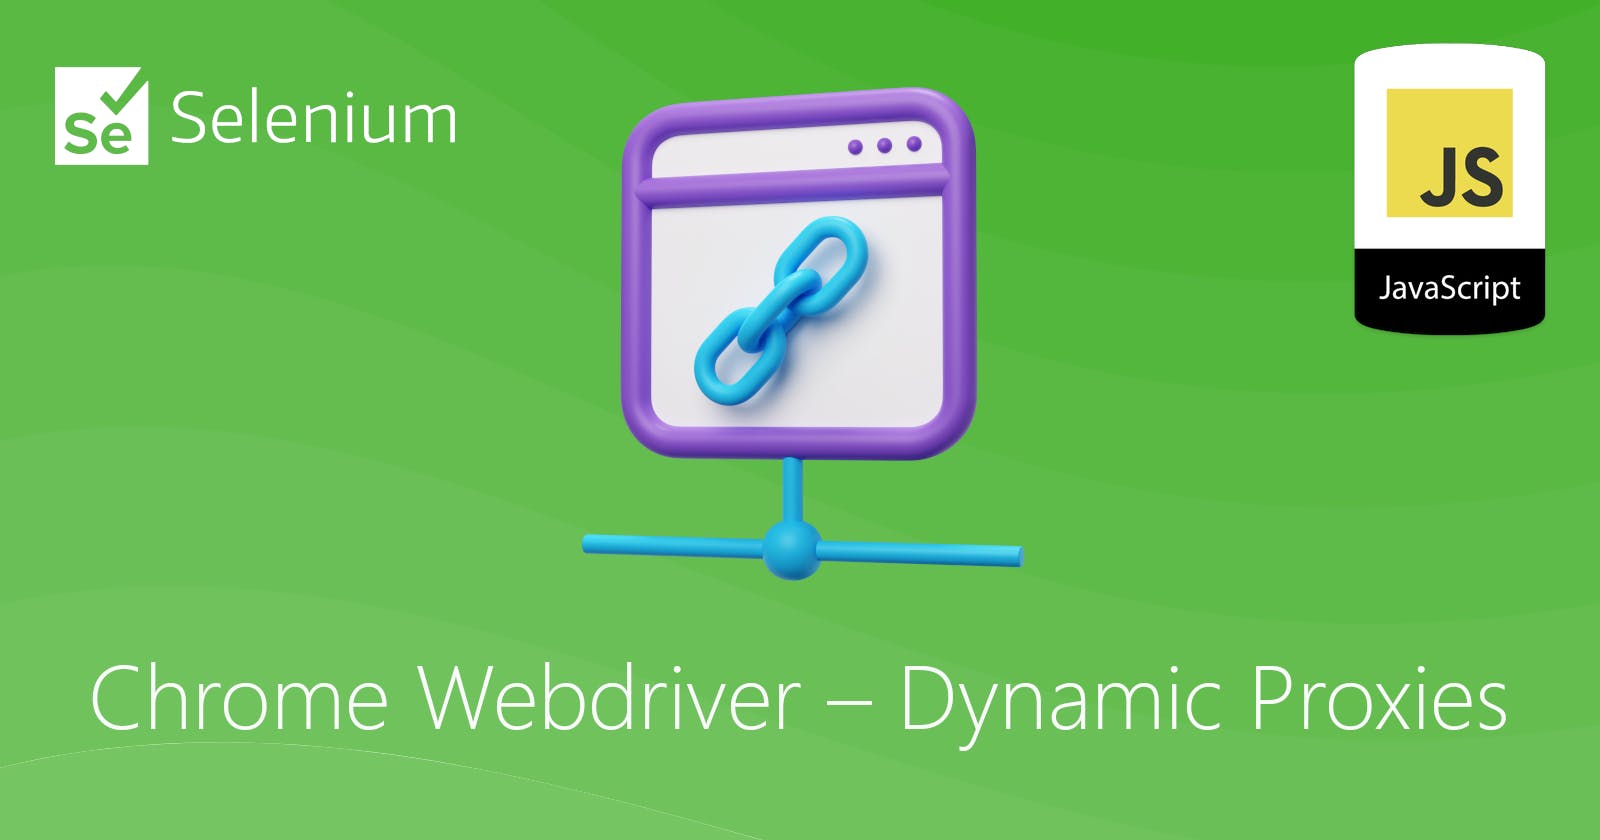 Selenium webdriver for Chrome: how to change the proxy at runtime (a workaround)